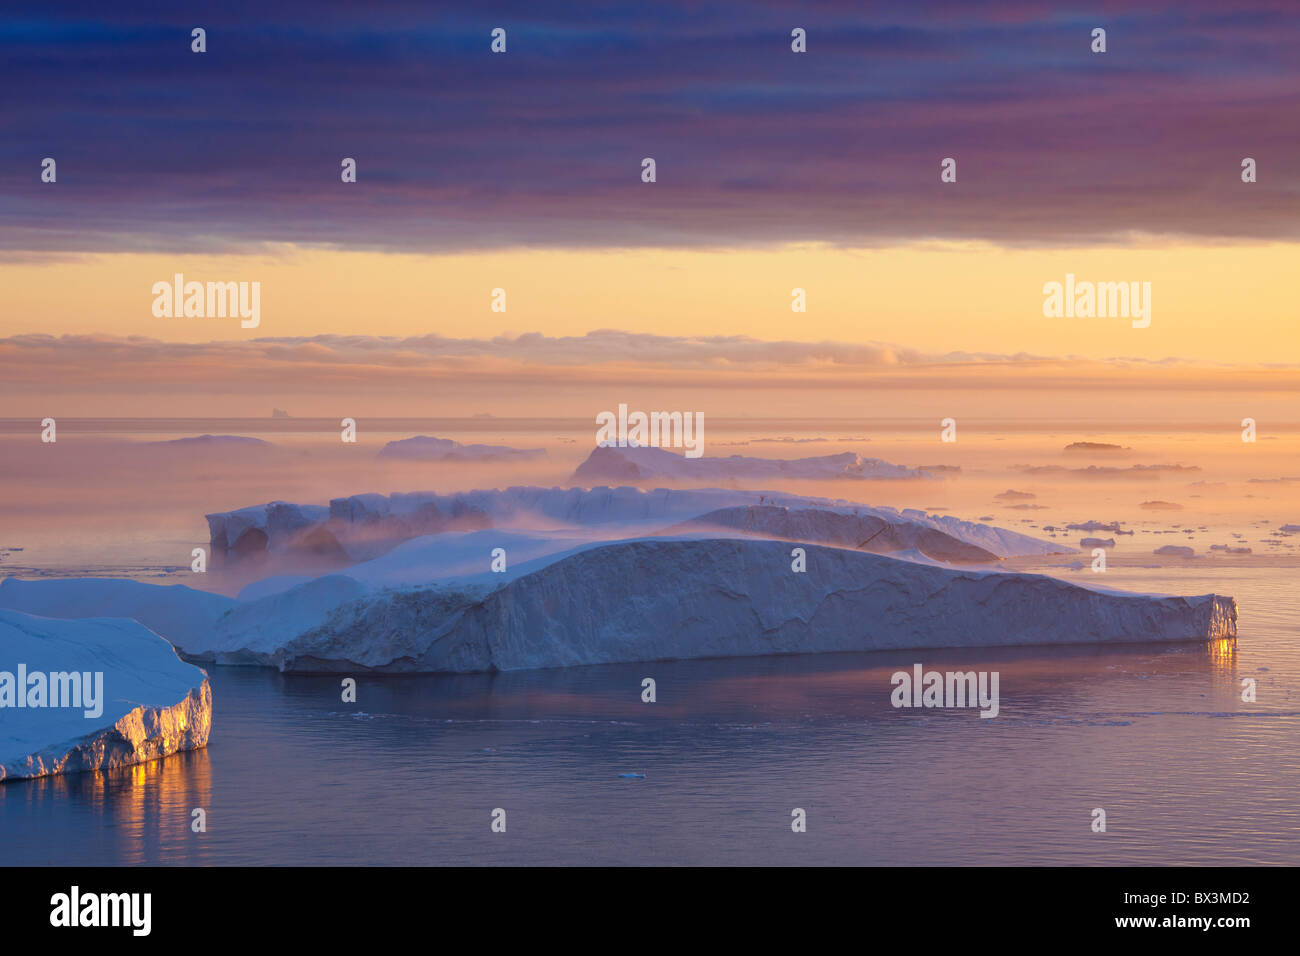 Icebergs in the mist, on UNESCO’s World Heritage List, at sunset, Kangia icefjord, Disko-Bay, West-Greenland, Greenland Stock Photo